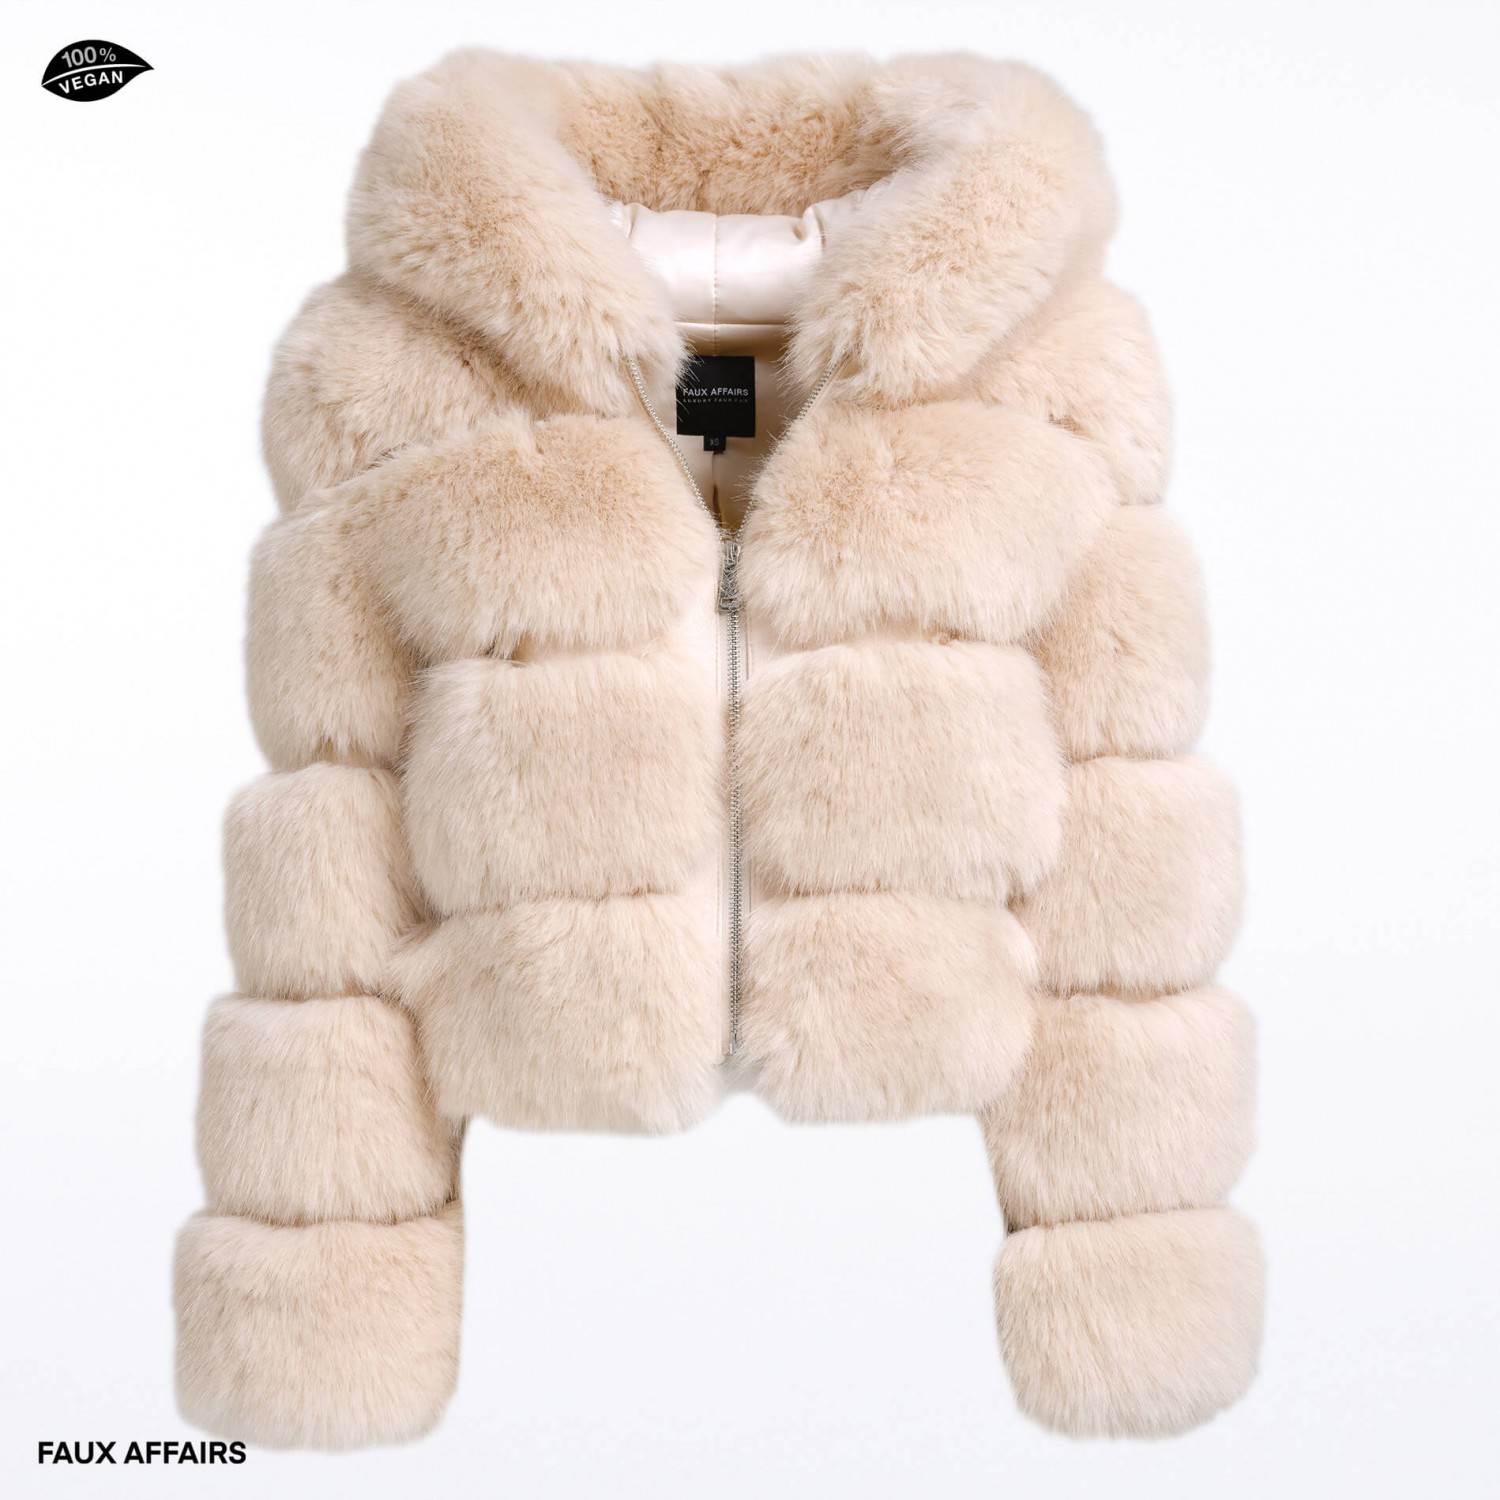 Faux Fur Jacket with hood